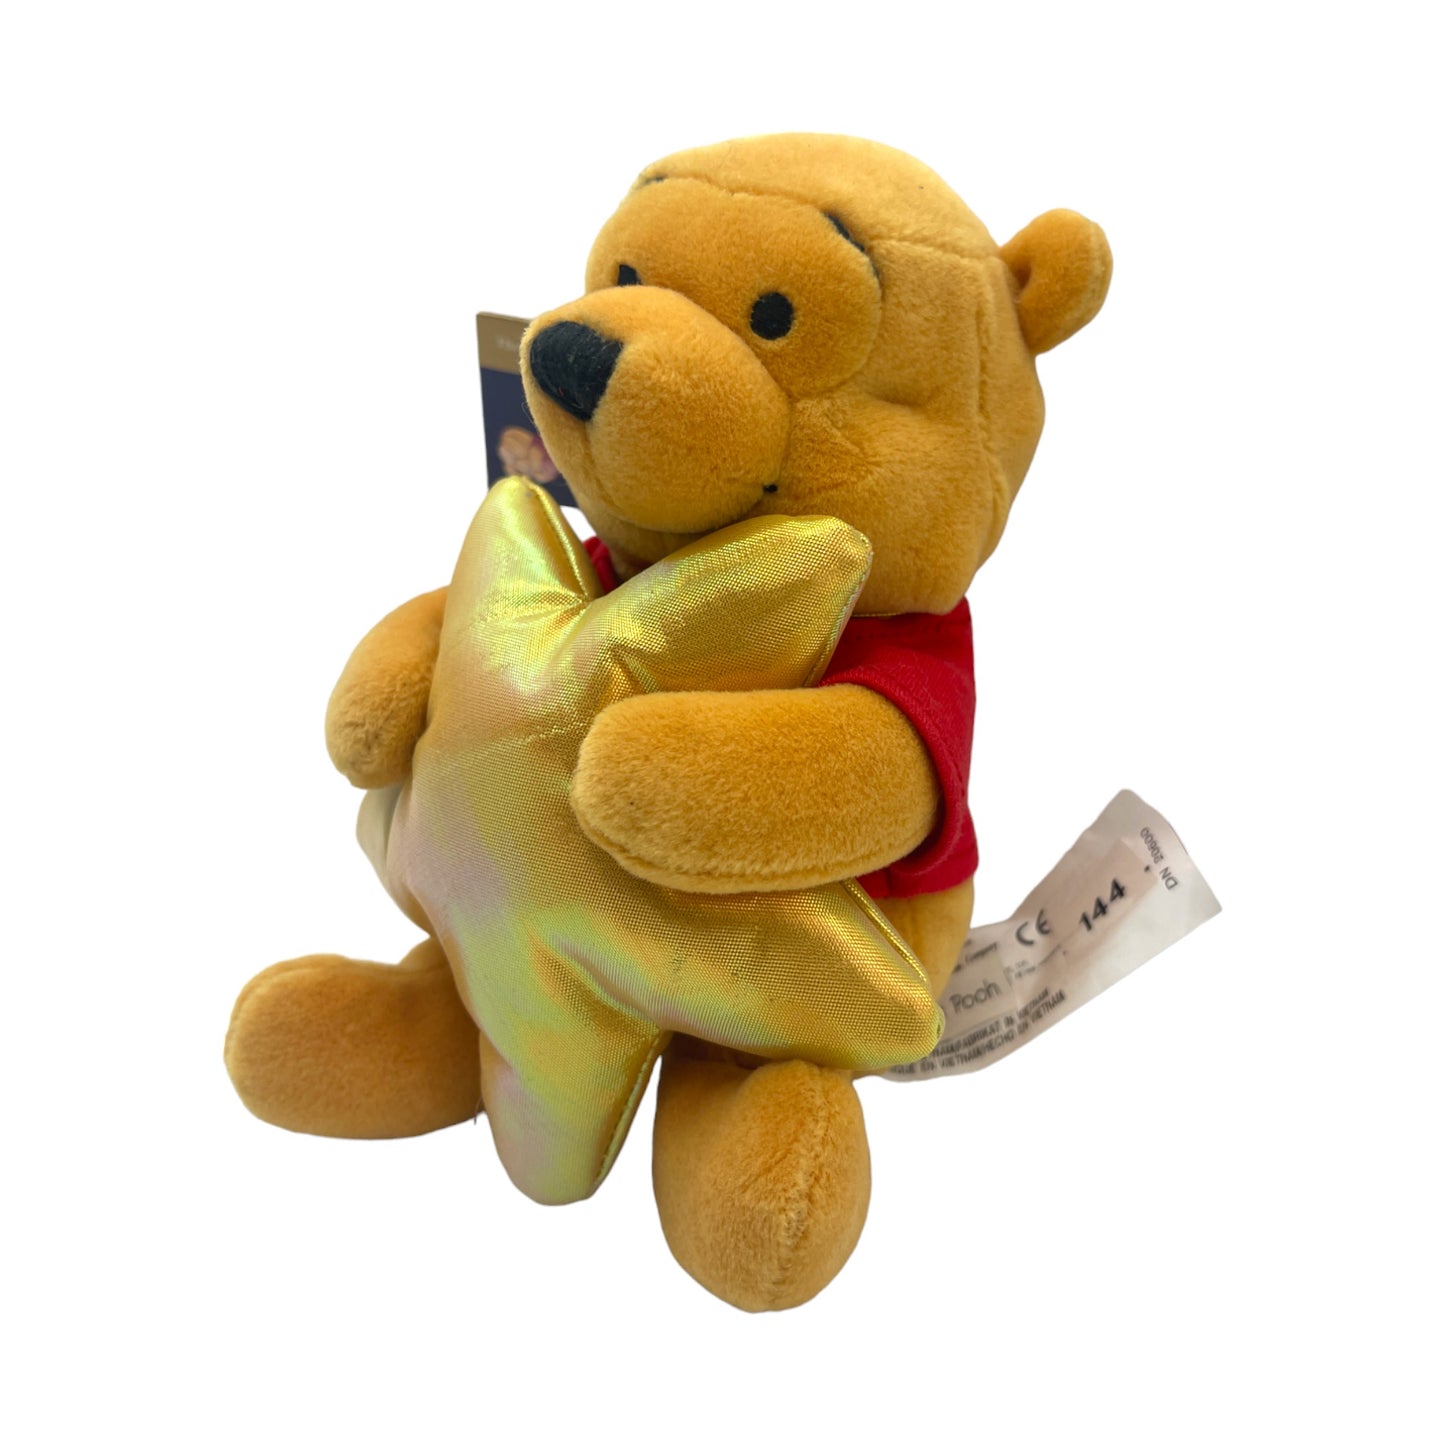 Disney Store London - Wishes Pooh - With Tag - Vintage - 8"